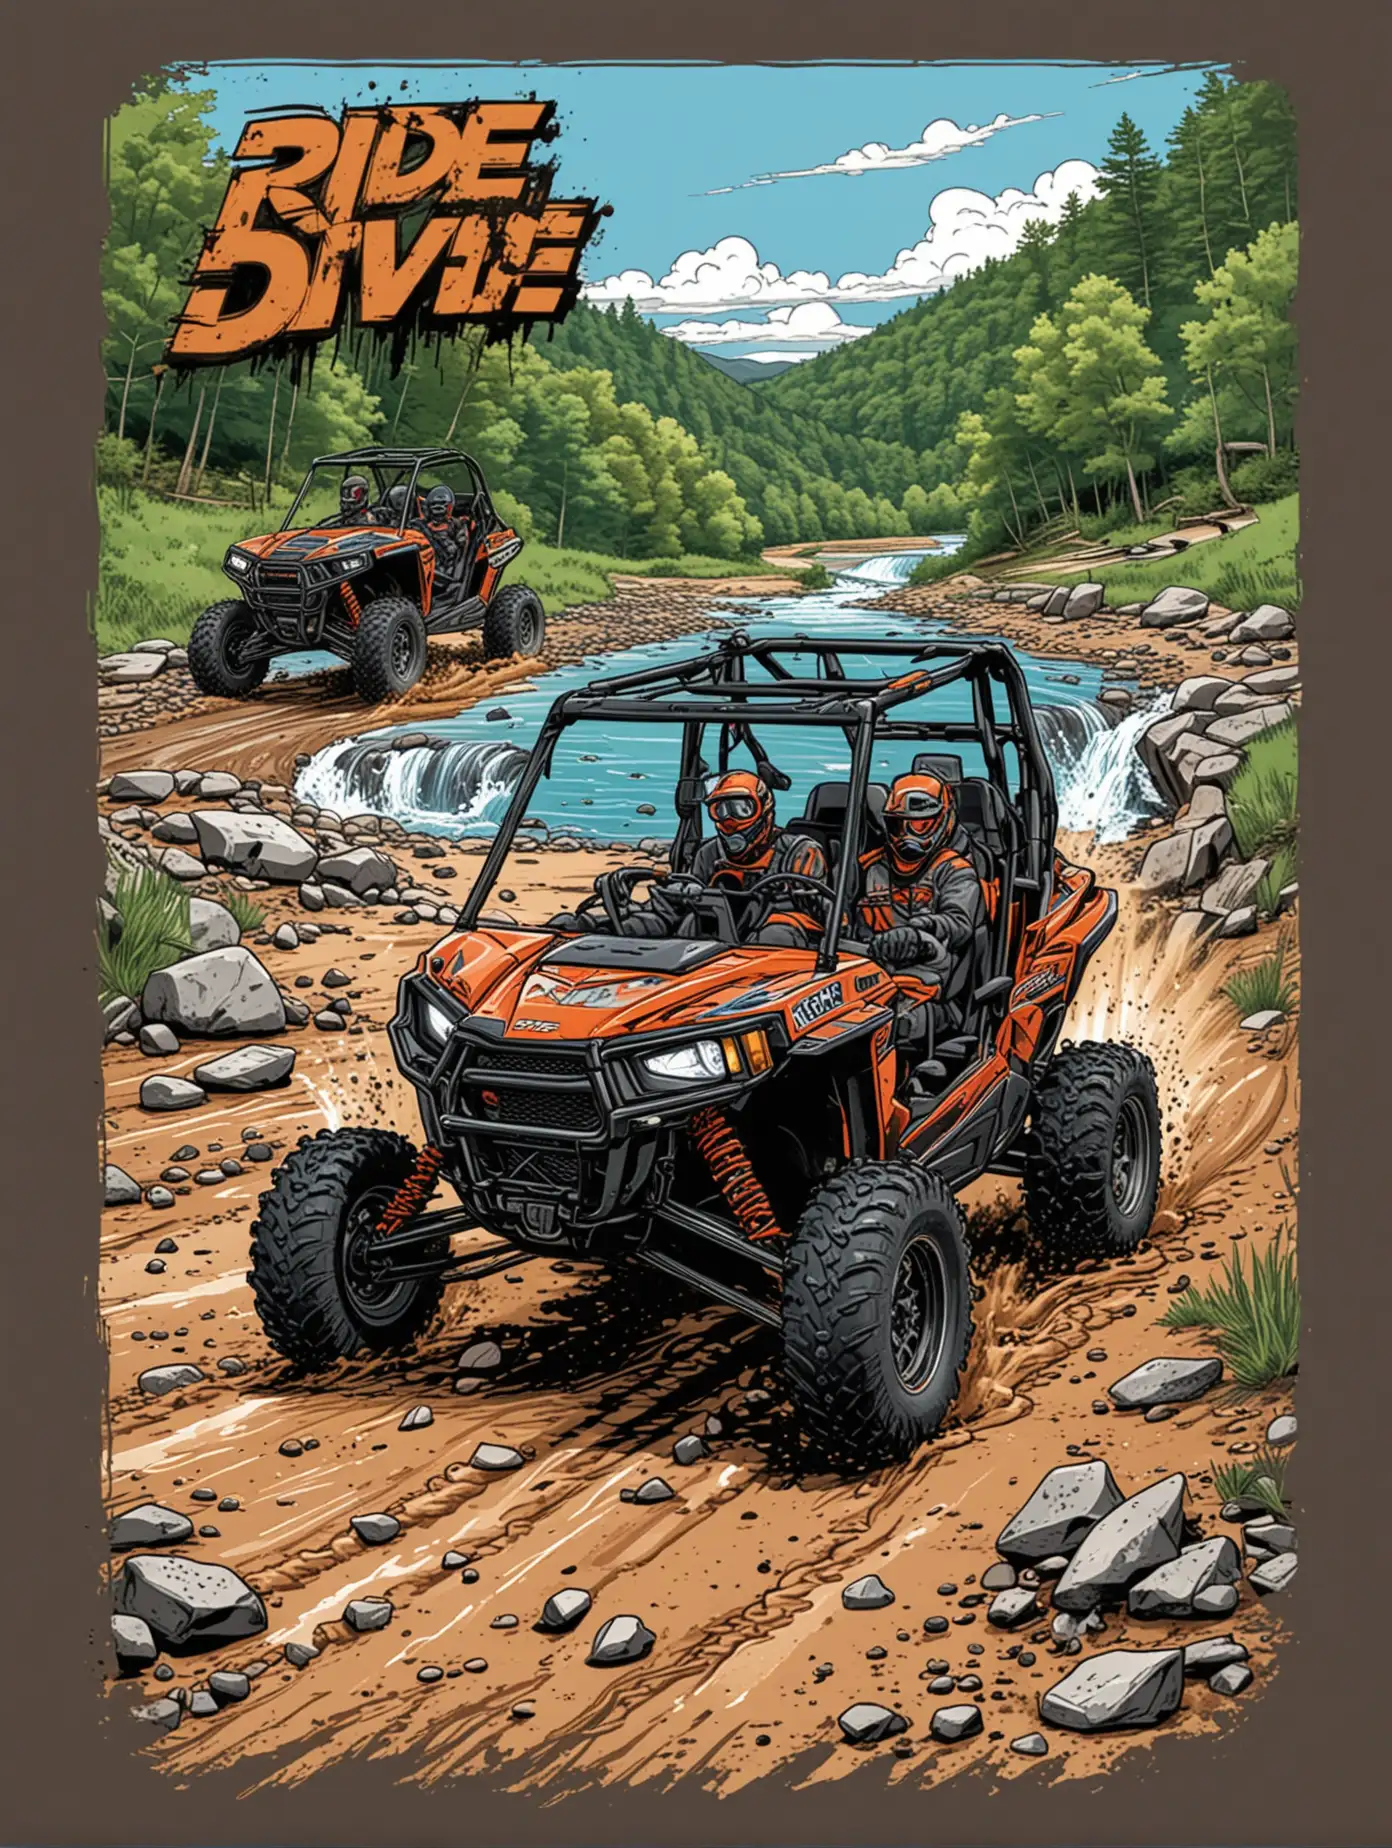 "Ride 2 Dive" cartoon spot color T-shirt Design with a rzr side by side on a dirt road with a river beside it muddy wv hills